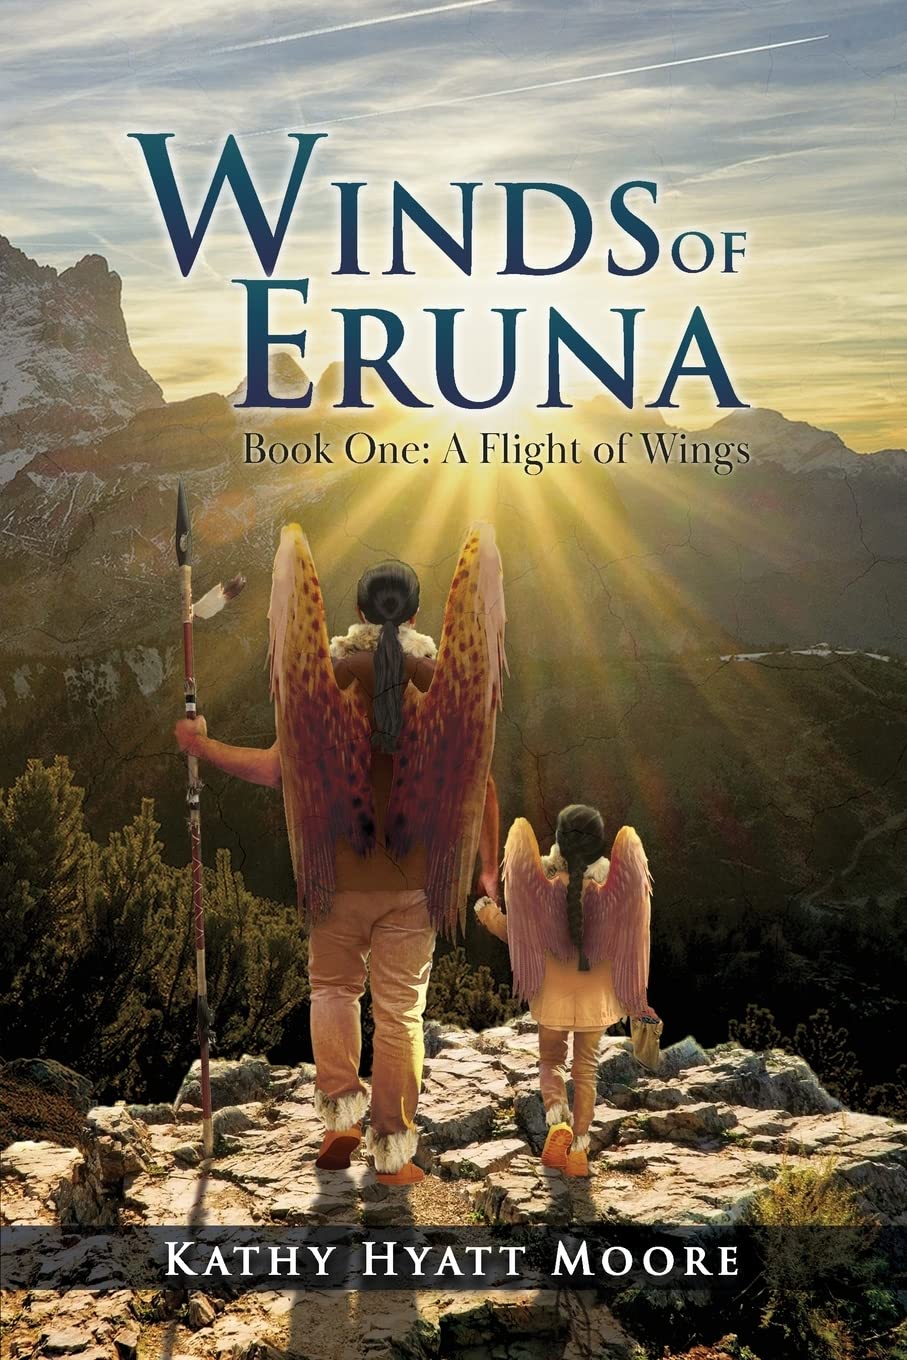 Author's Tranquility Press proudly presents Kathy Hyatt Moore’s book "Winds of Eruna, Book One: A Flight of Wings"